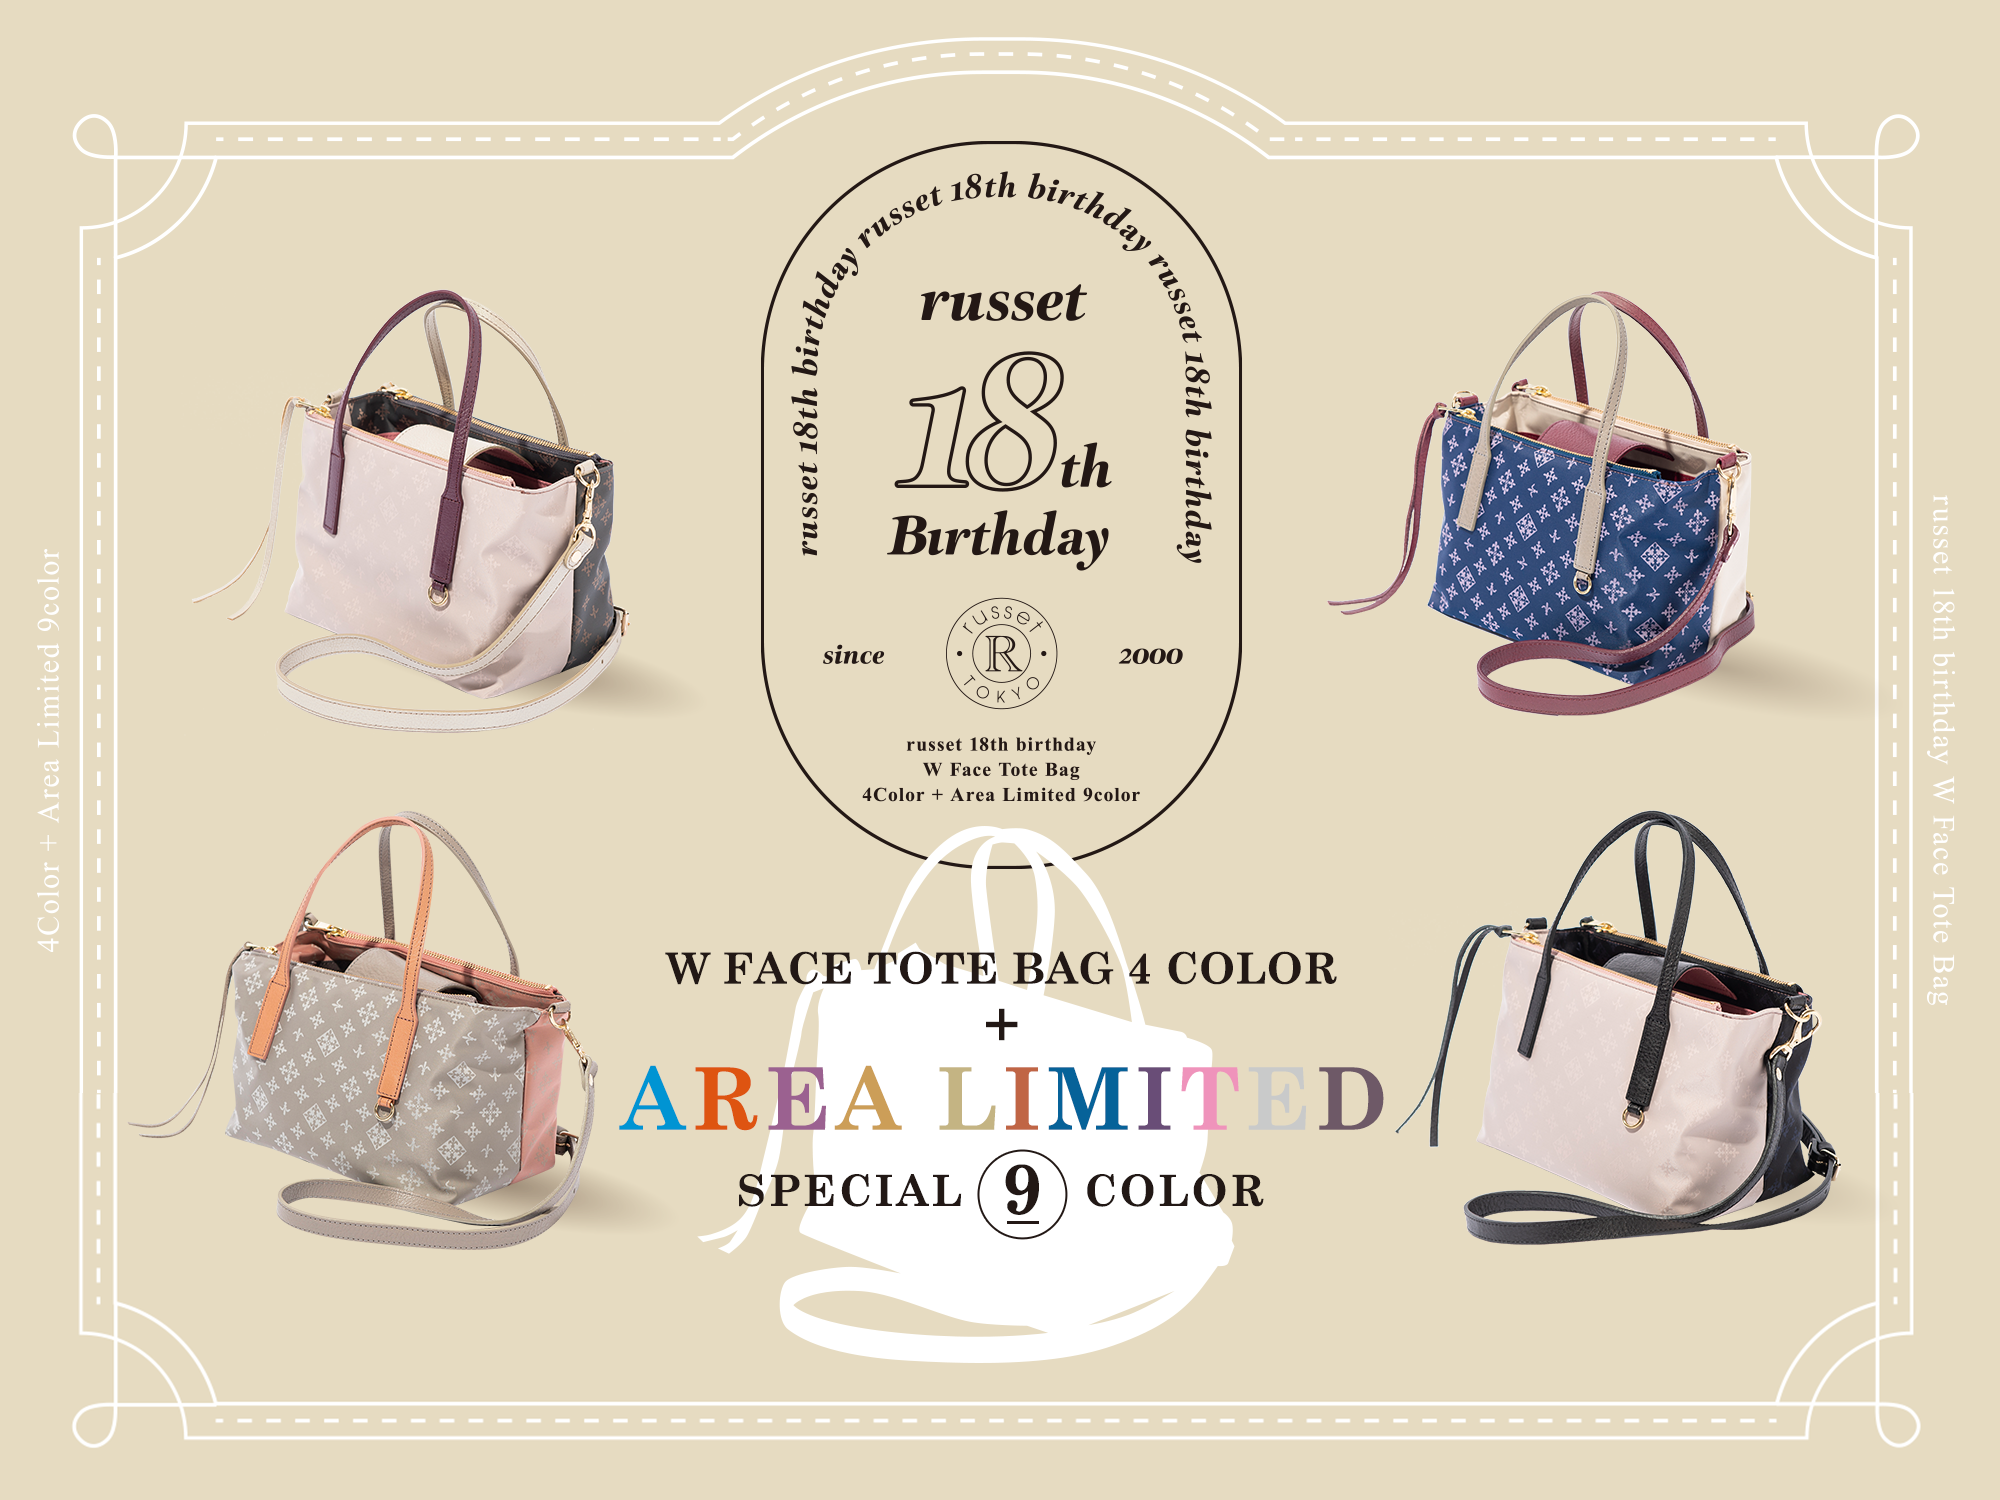 russet 18th Birthday - W FACE TOTE BAG 4 COLOR + AREA LIMITED 9 COLOR